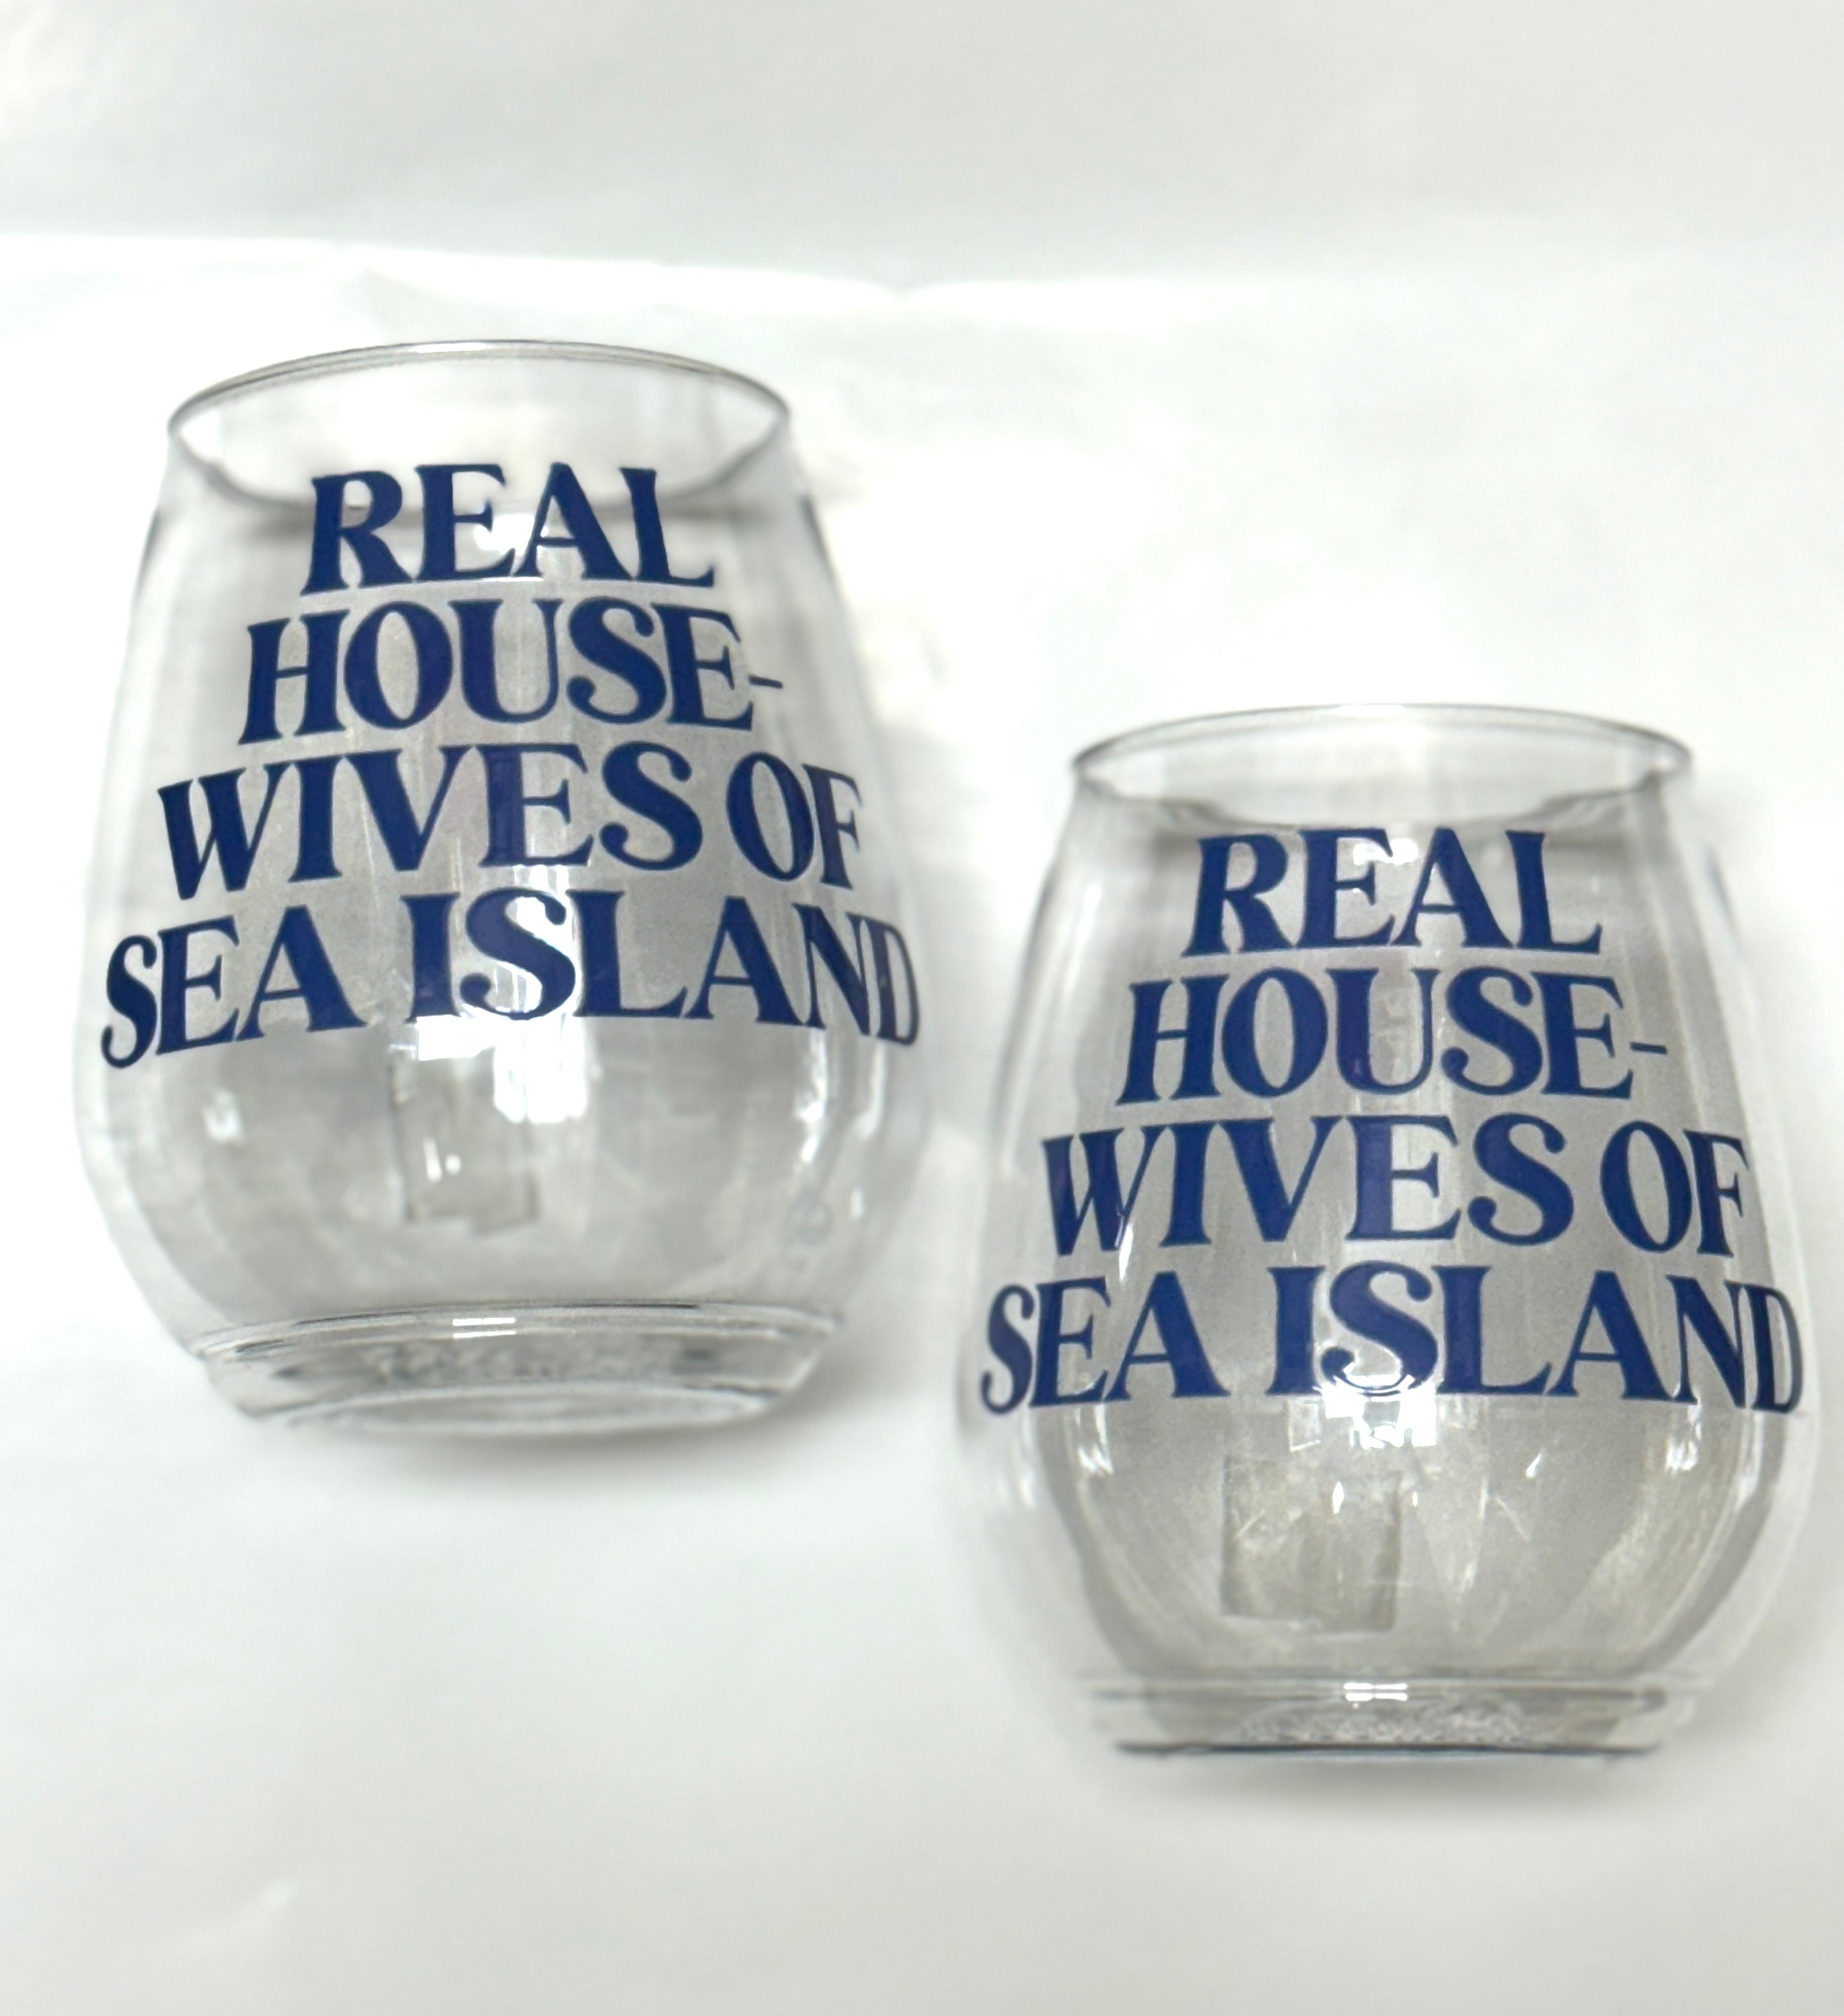 Real Housewives of Sea Island Shatterproof Cups (set of 2)